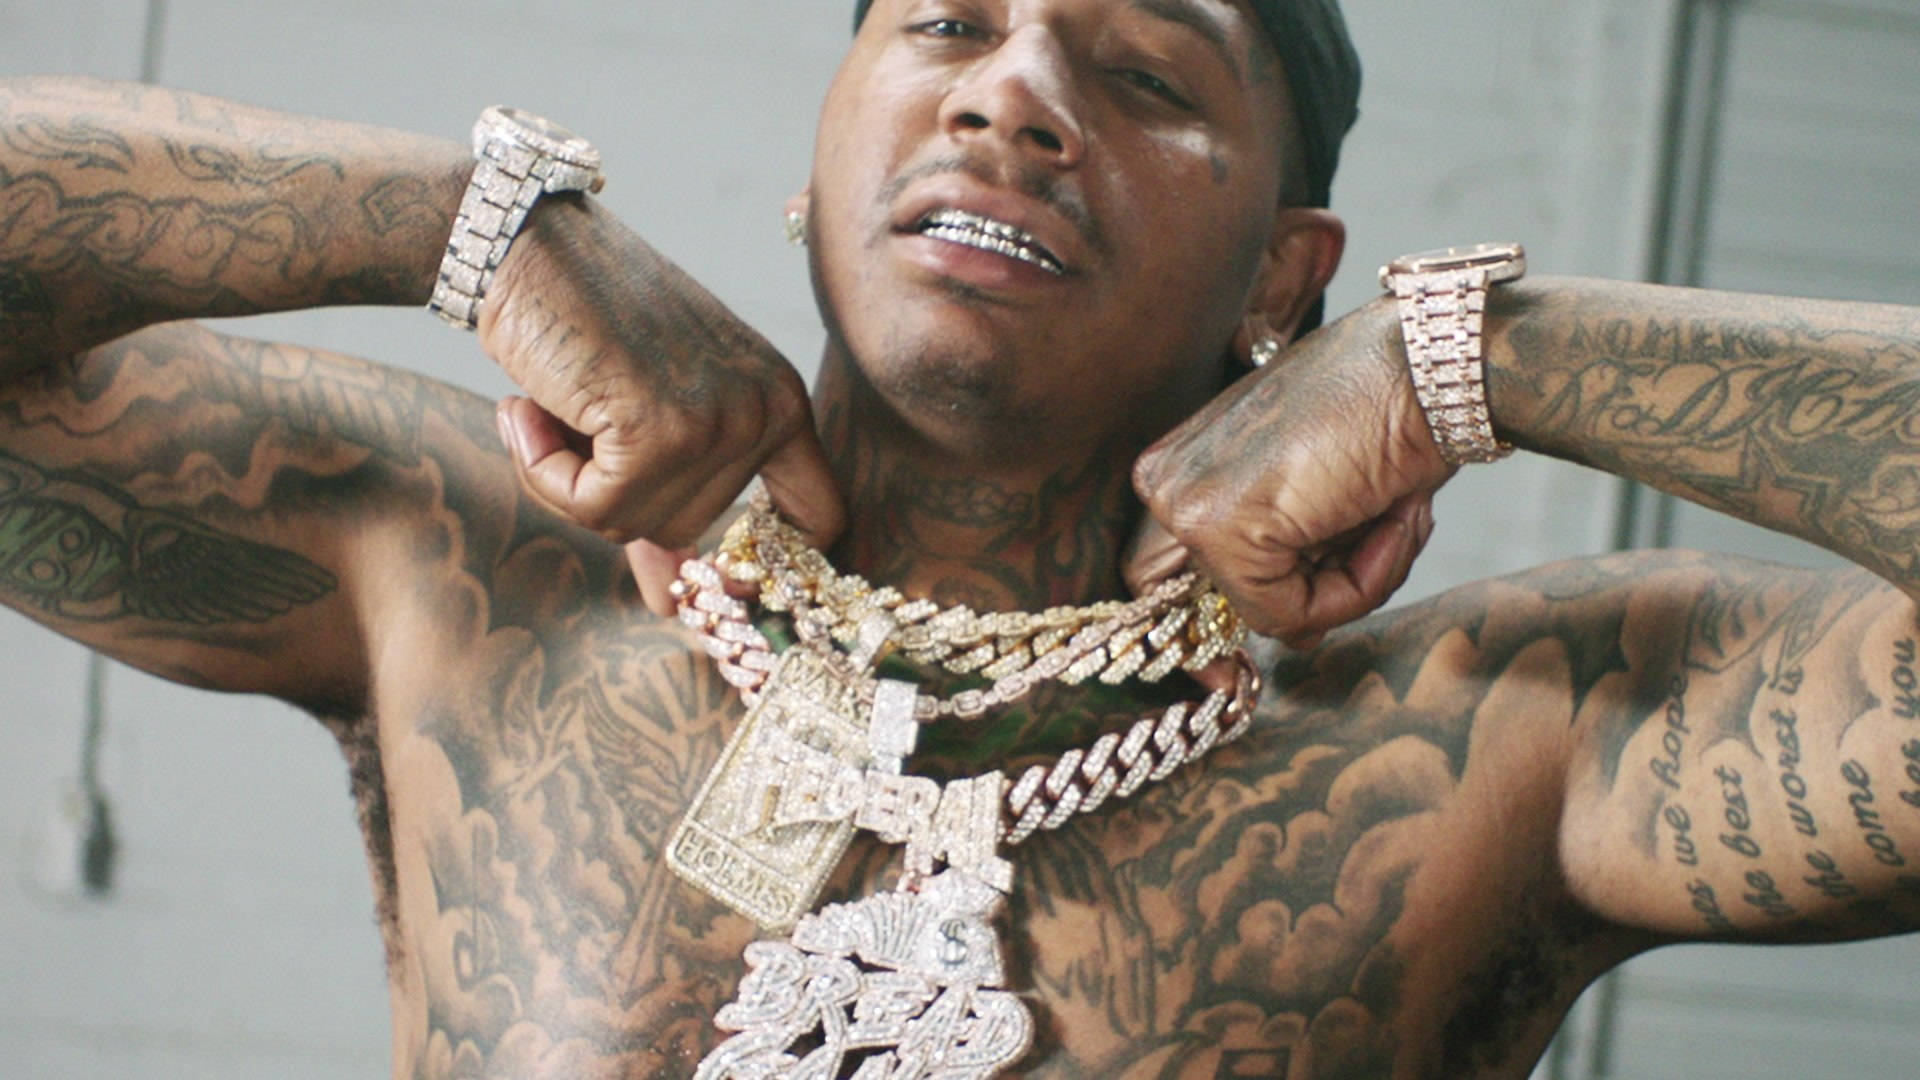 Moneybagg Yo's Suspected Leaked Video Shows Him With a Stripper